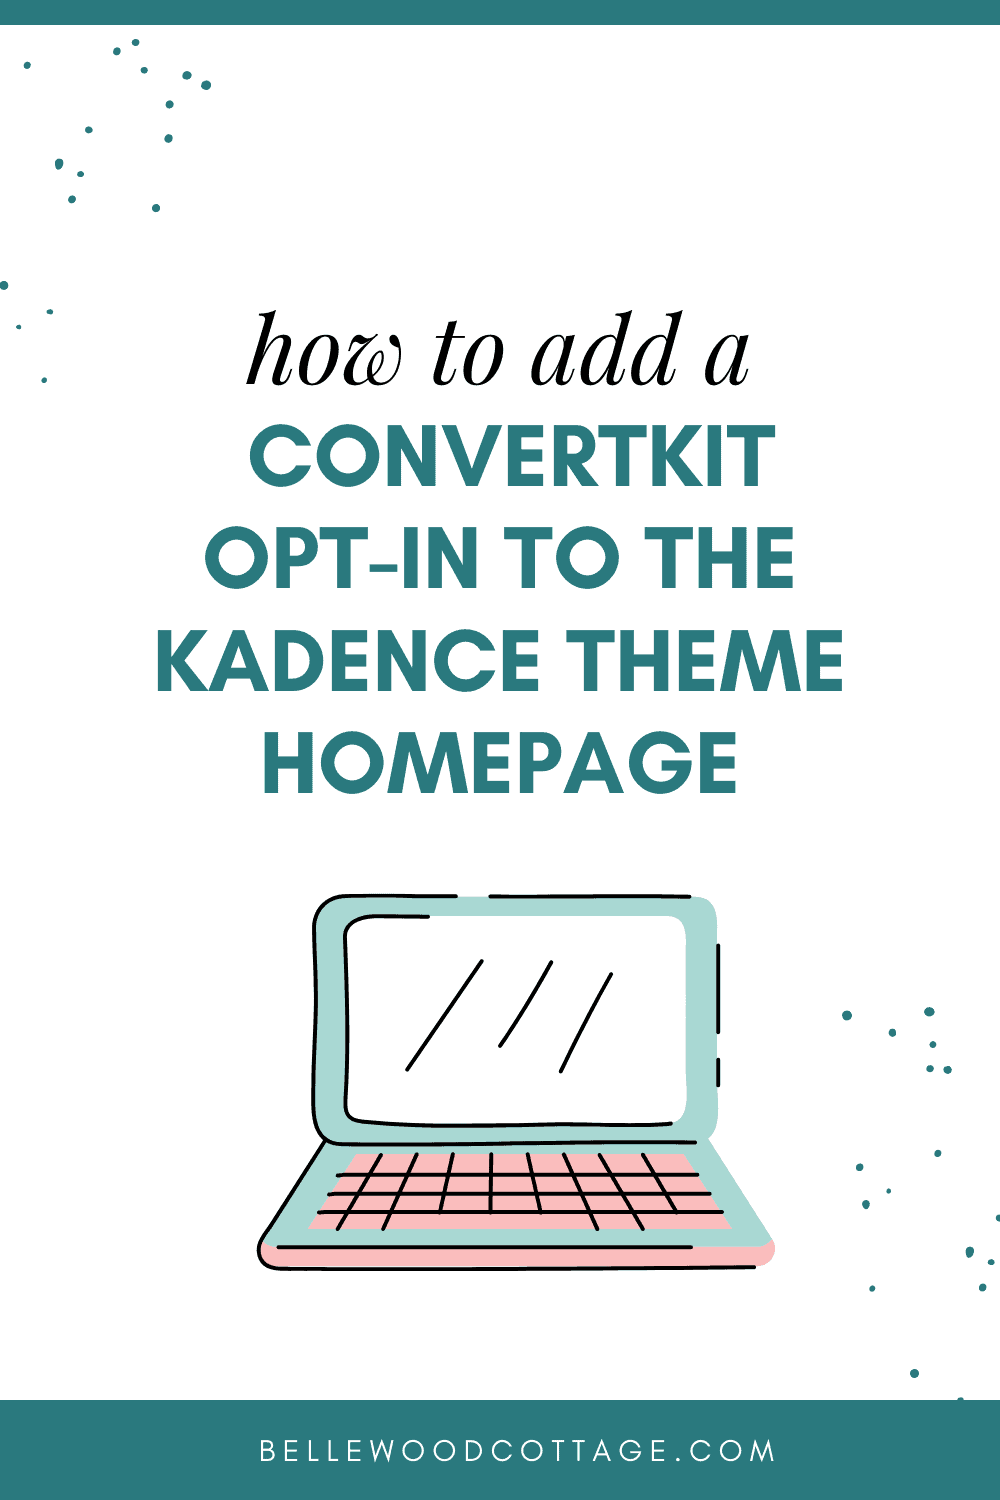 An illustration of a computer with the text, "how to add a ConvertKit Opt-In to the Kadence Theme Homepage."